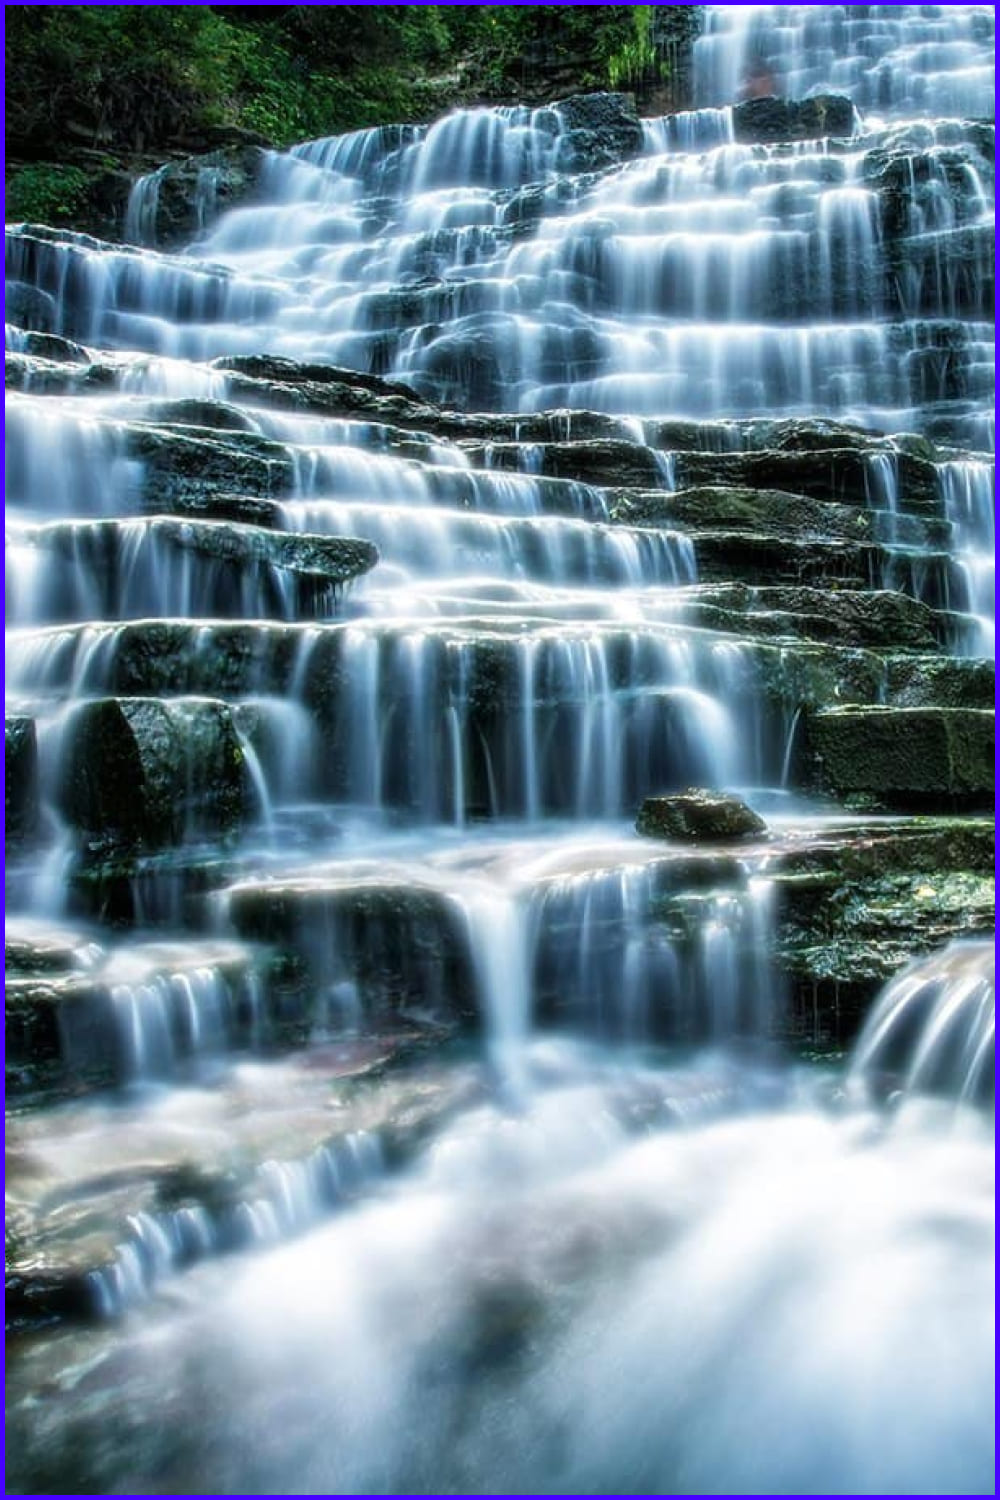 Photo of water flowing over rocks in the forest.